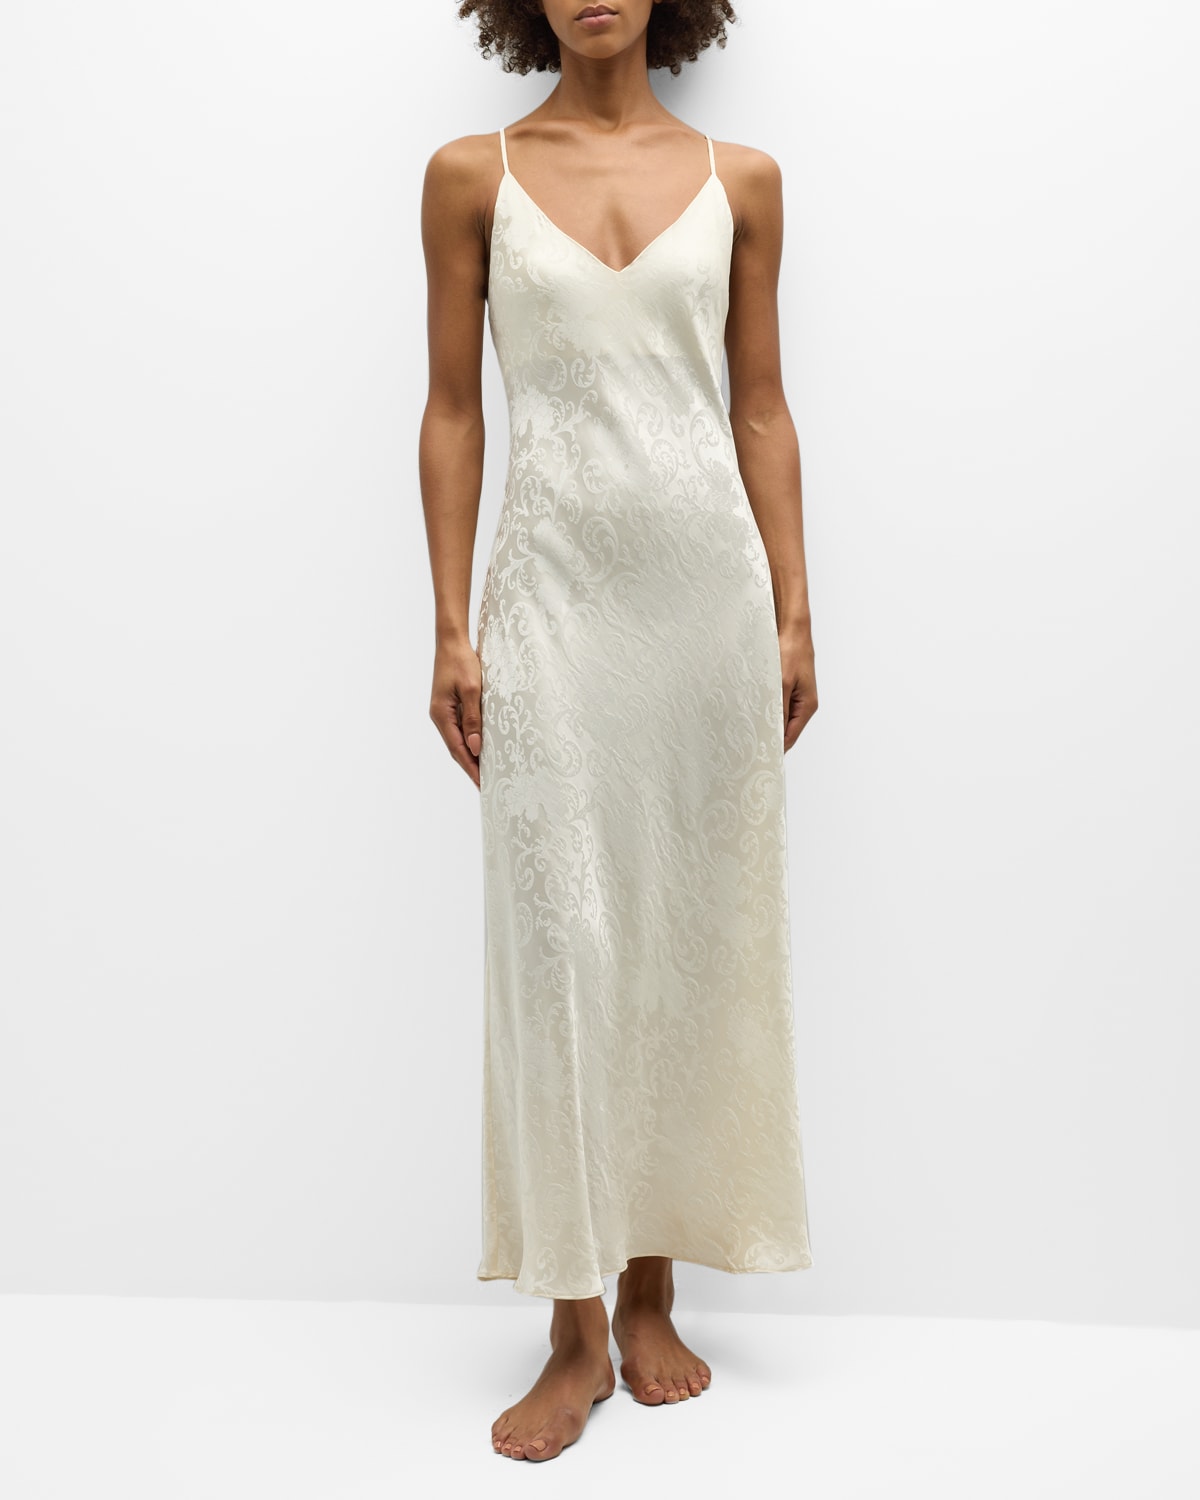 Ines V-Neck Floral Jacquard Nightgown